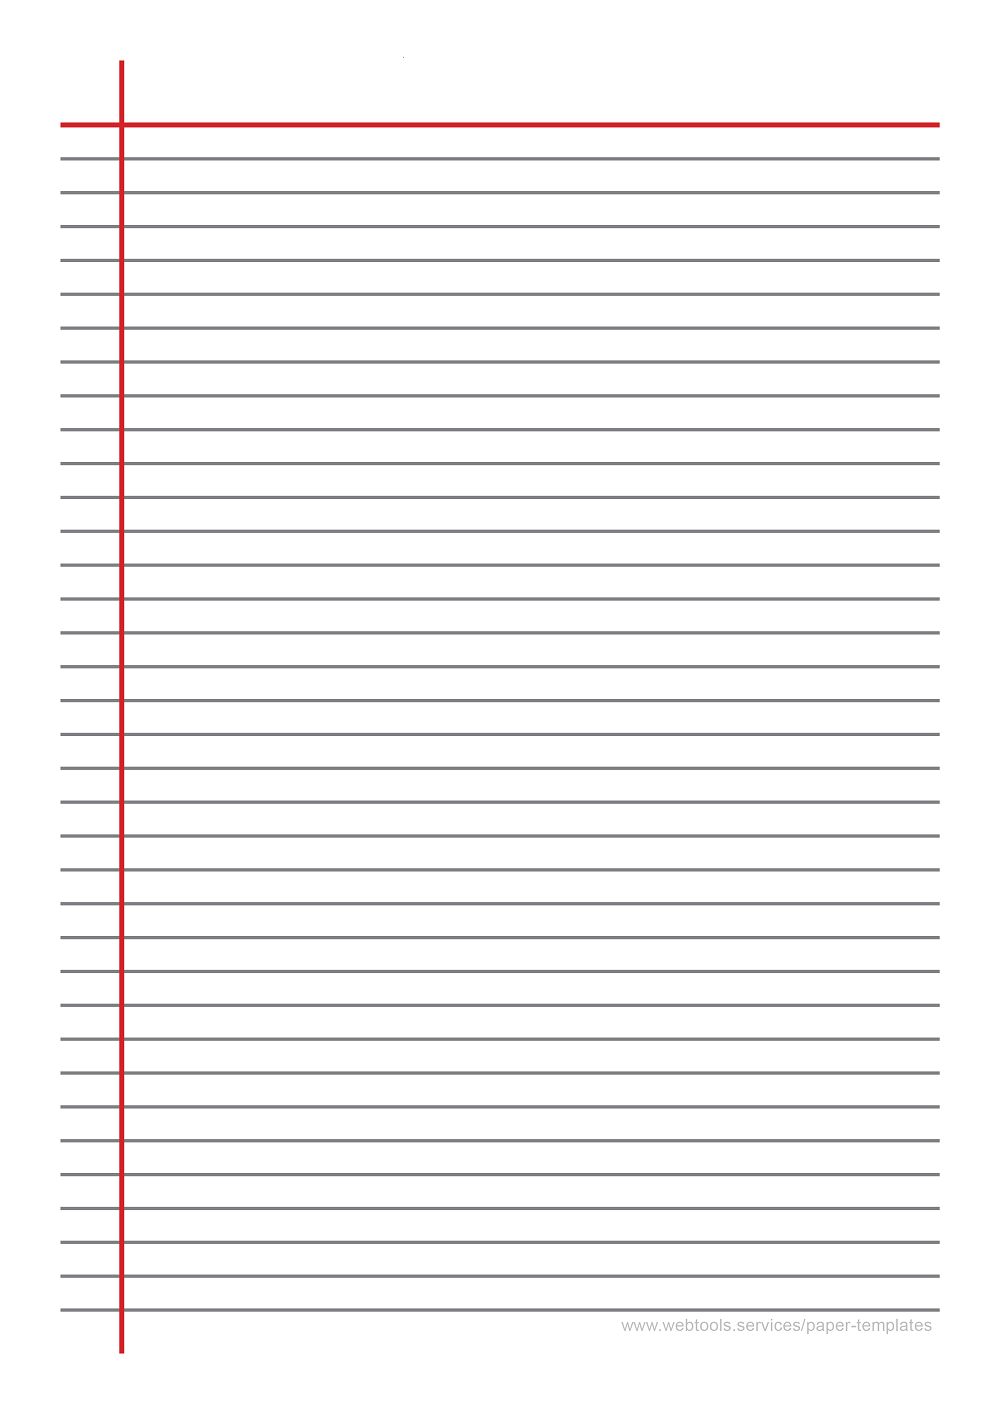 Black Line Writing Paper Template With Horizontal And Vertical Margins And 7.1mm Line Height